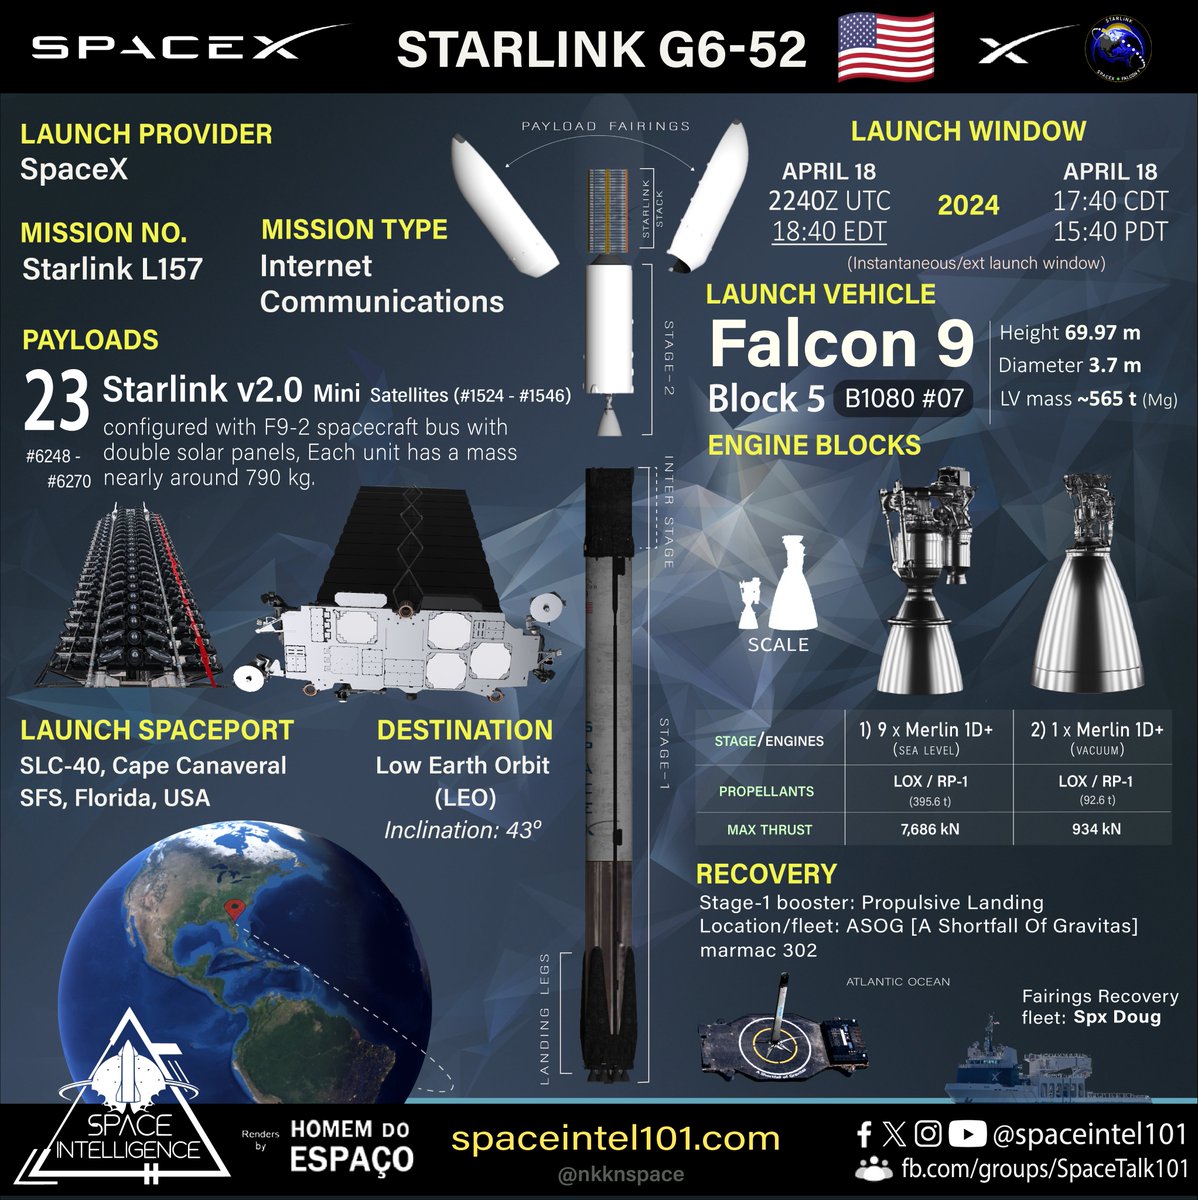 Orbital launch no. 75 of 2024 🇺🇲🚀⭐🔗🛰️➕ Starlink L157 | SpaceX | April 18 | 2240 UTC @SpaceX's 27th #Starlink mission of 2024 to launch 23 v2.0 @Starlink Mini🛰️ on its #Falcon9 #B1080.7🚀 to 43° Low Earth Orbit from @SLDelta45 SLC-40, Cape Canaveral. #SpaceX #capecanaveral…